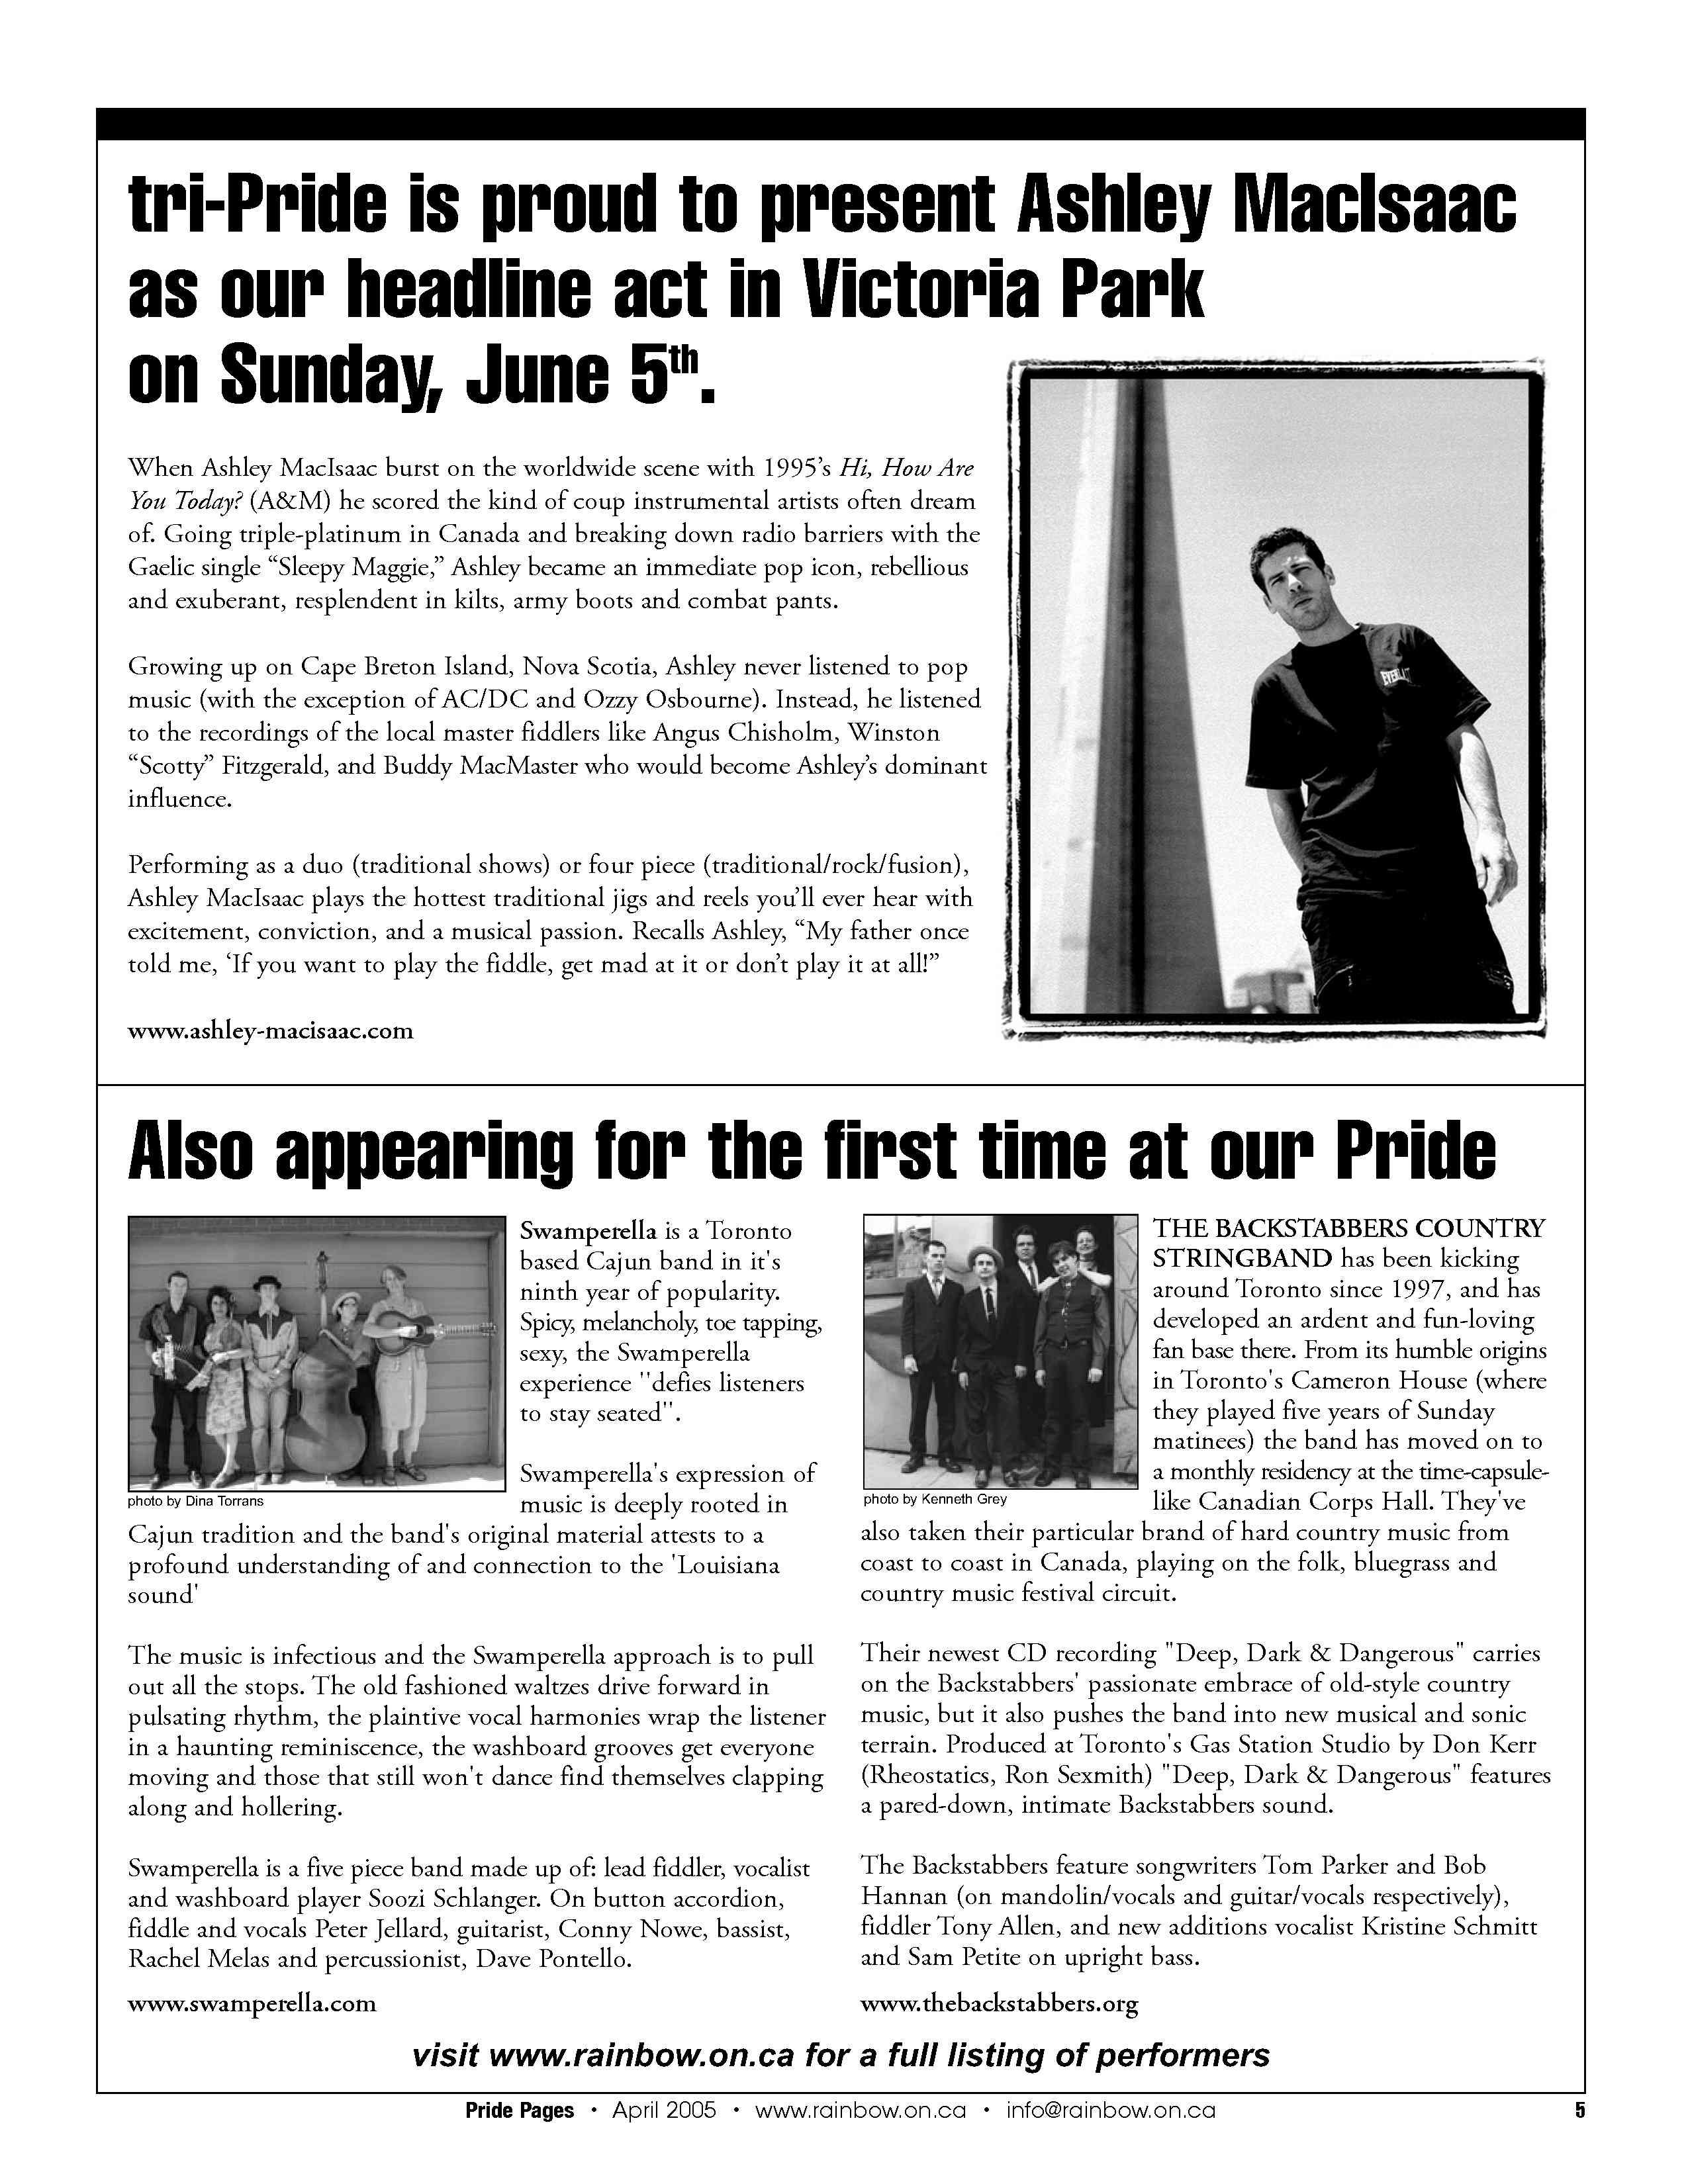 Pride Pages 2005-04 p5